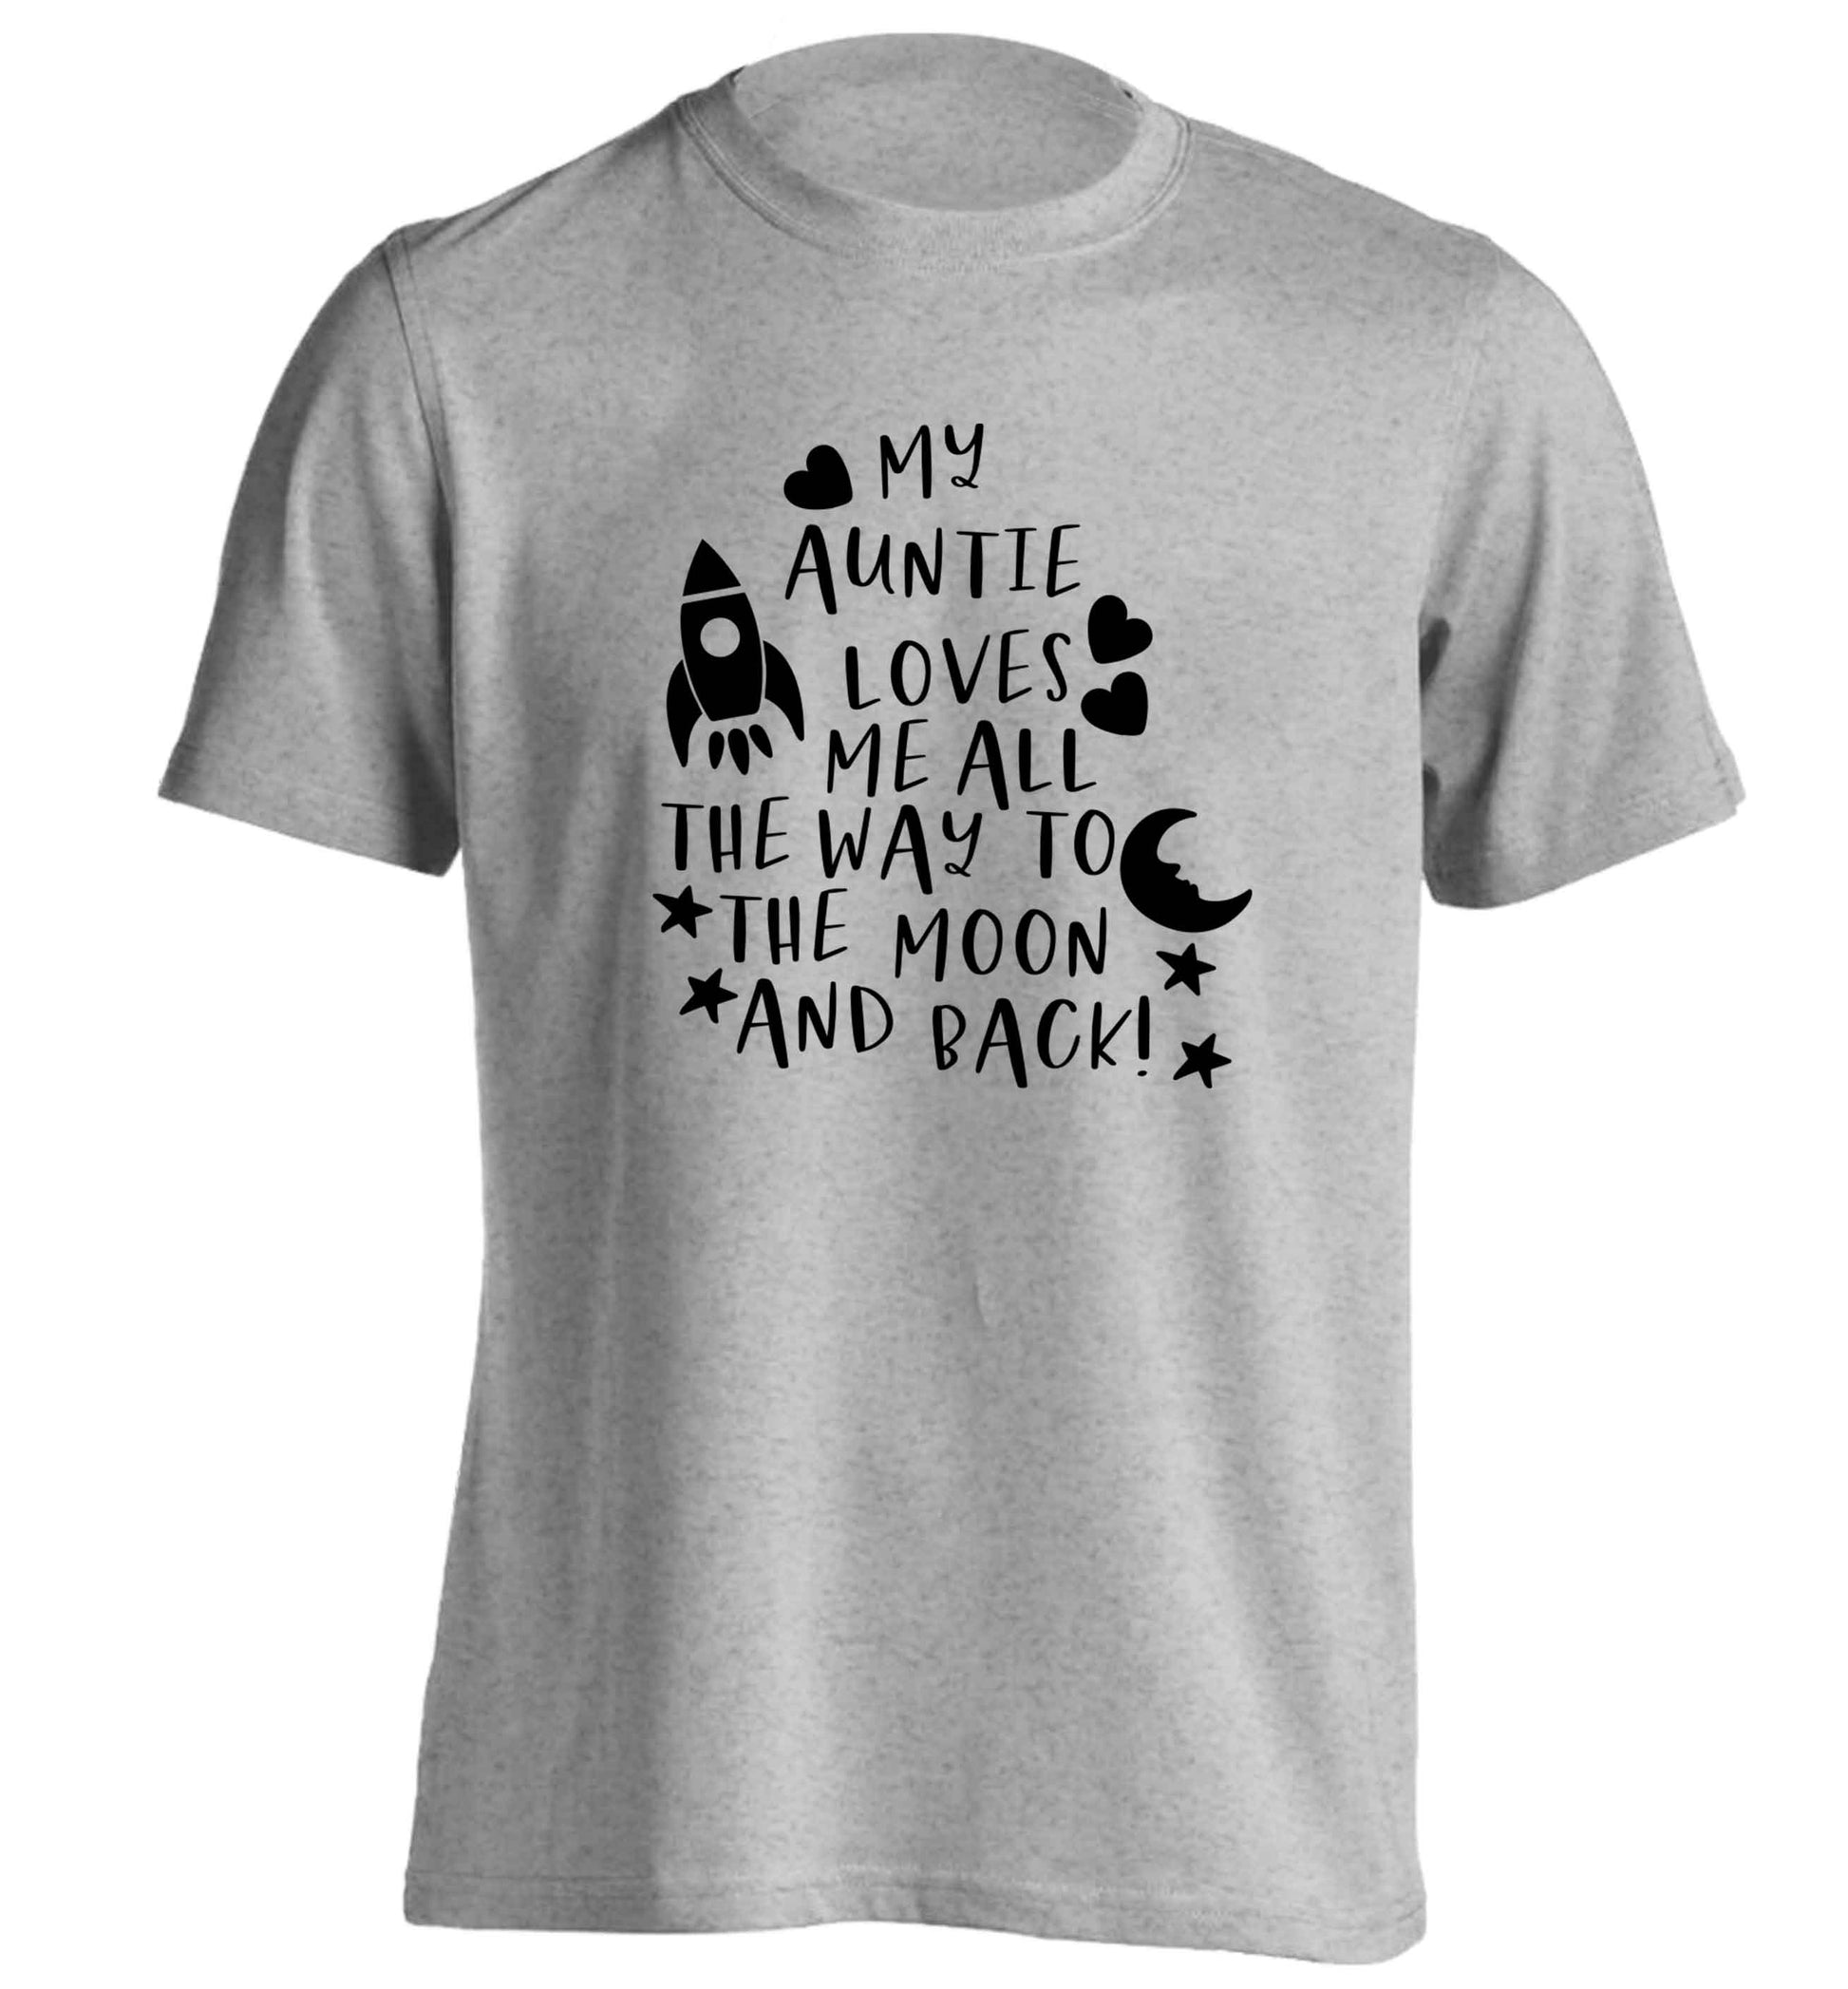 My auntie loves me all the way to the moon and back adults unisex grey Tshirt 2XL